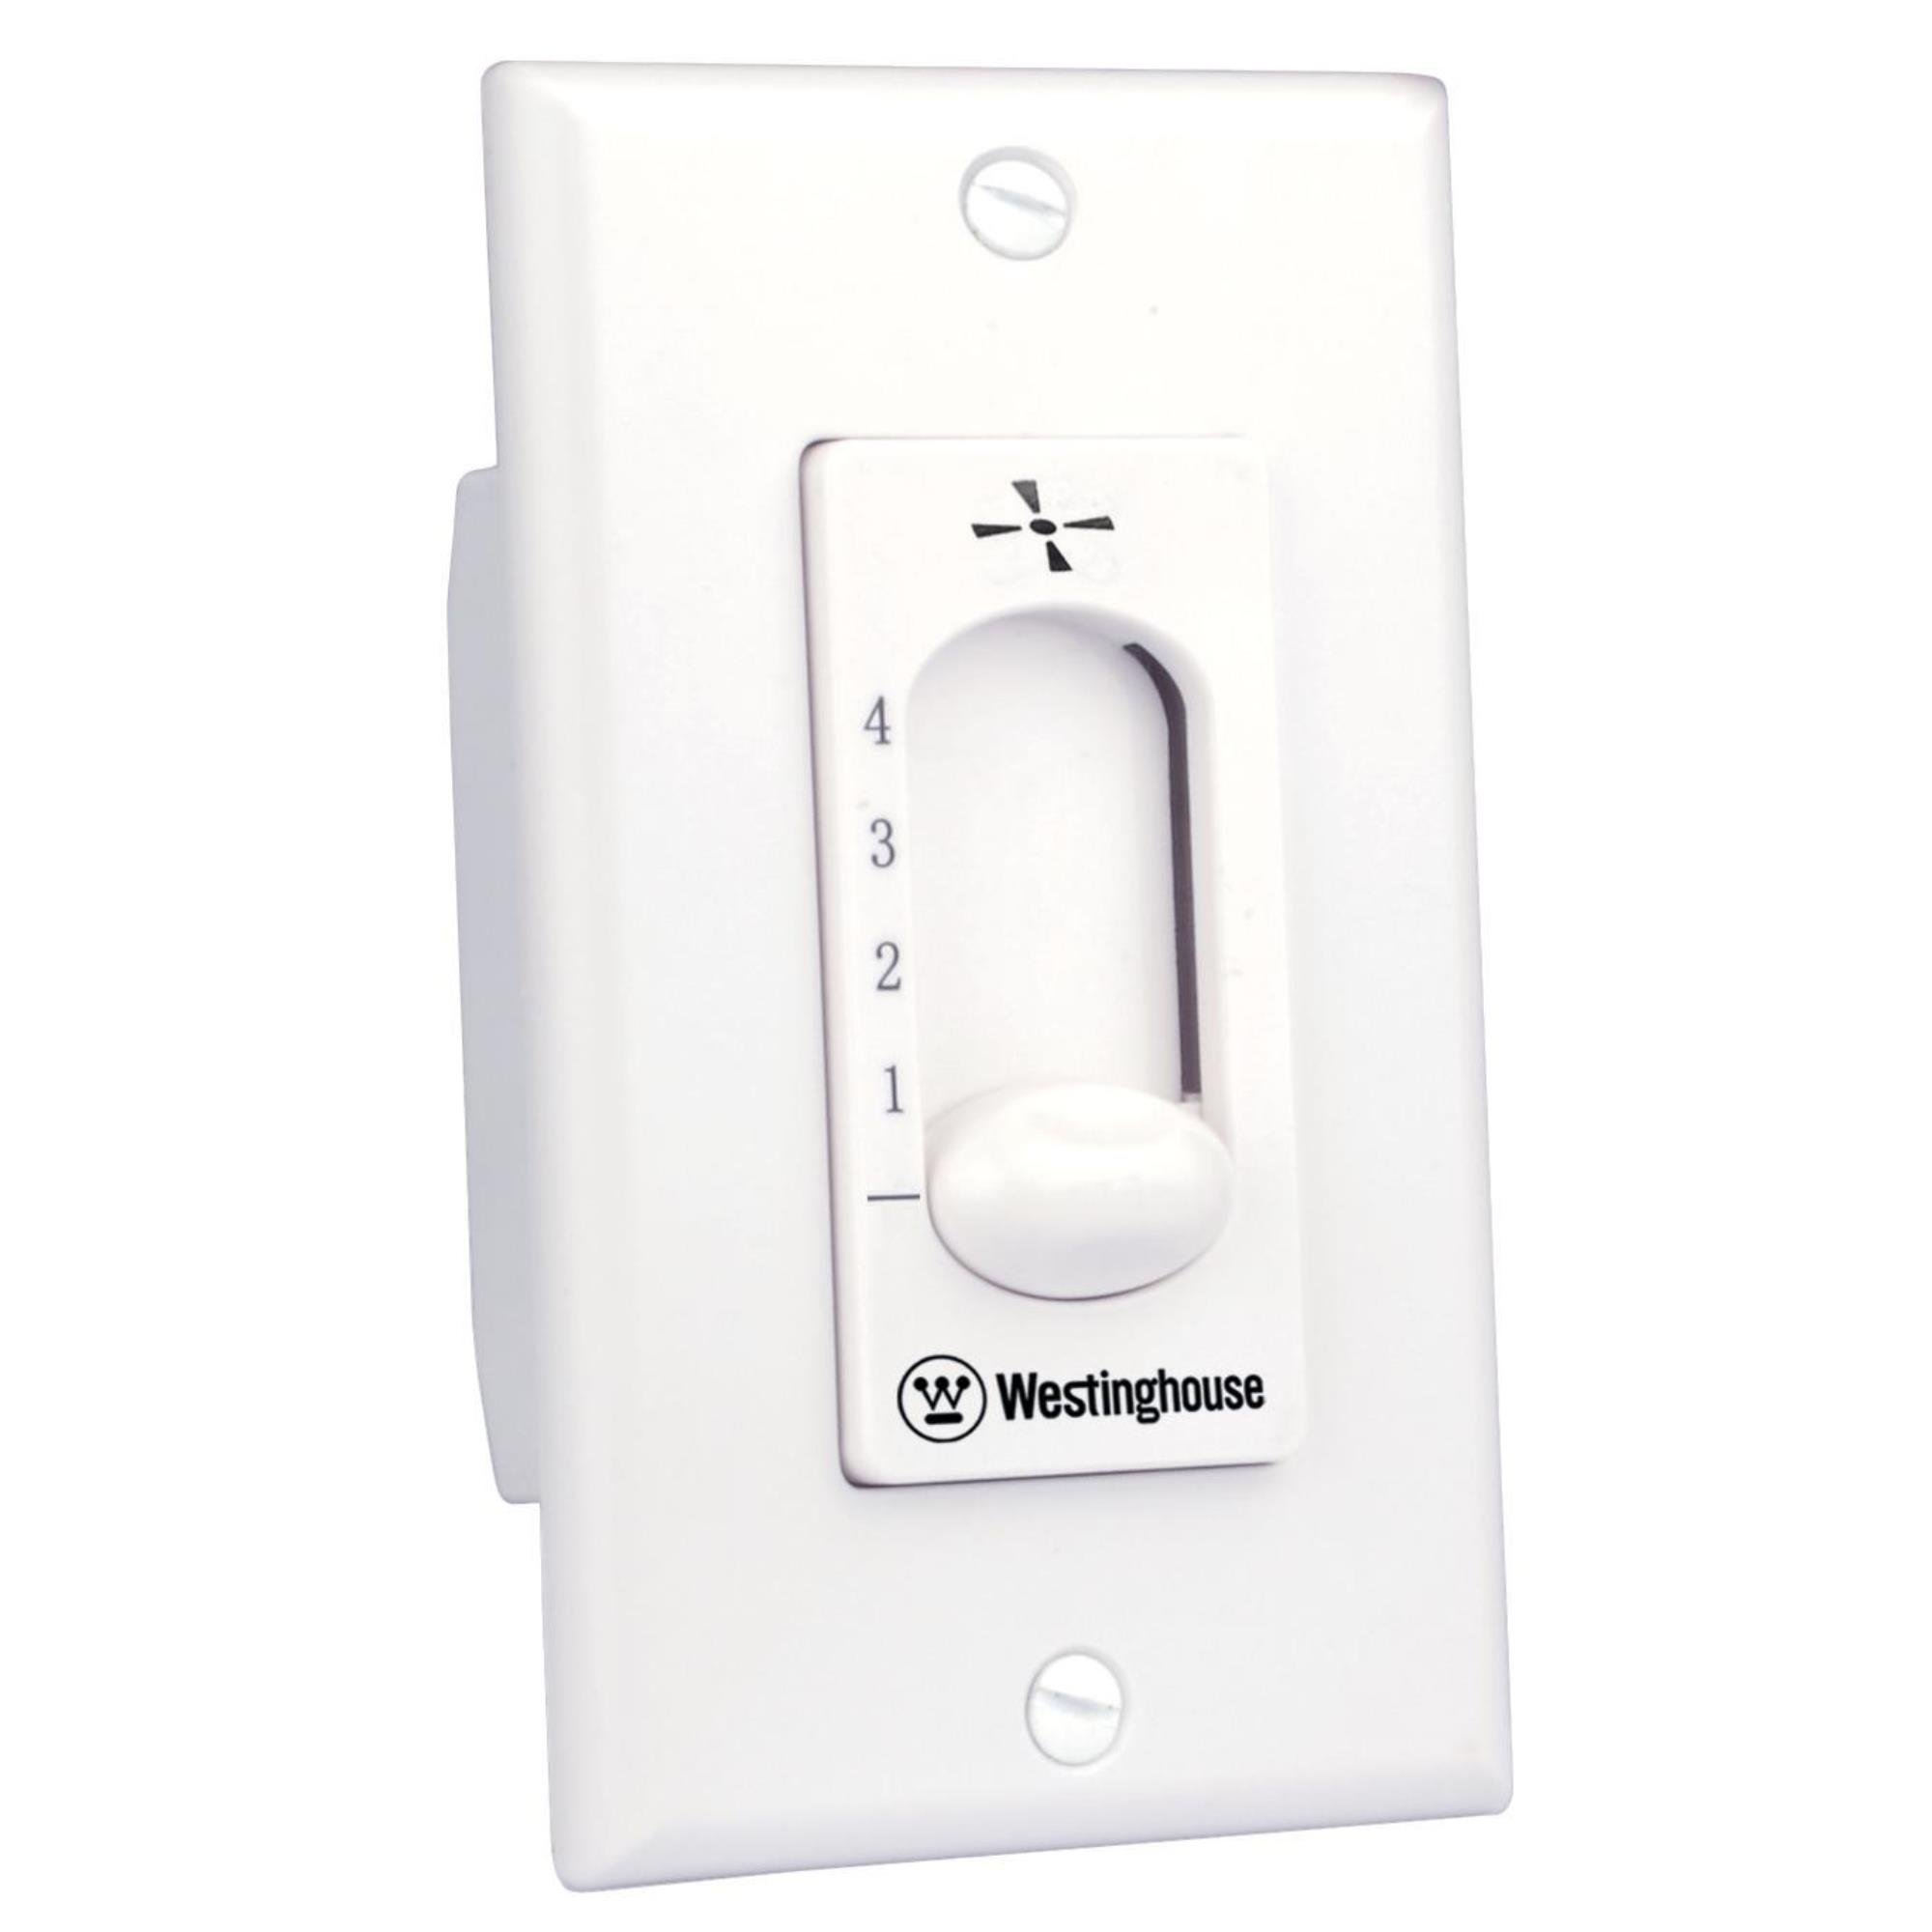 Westinghouse Lighting 7787200 Ceiling Fan Wall Control , White